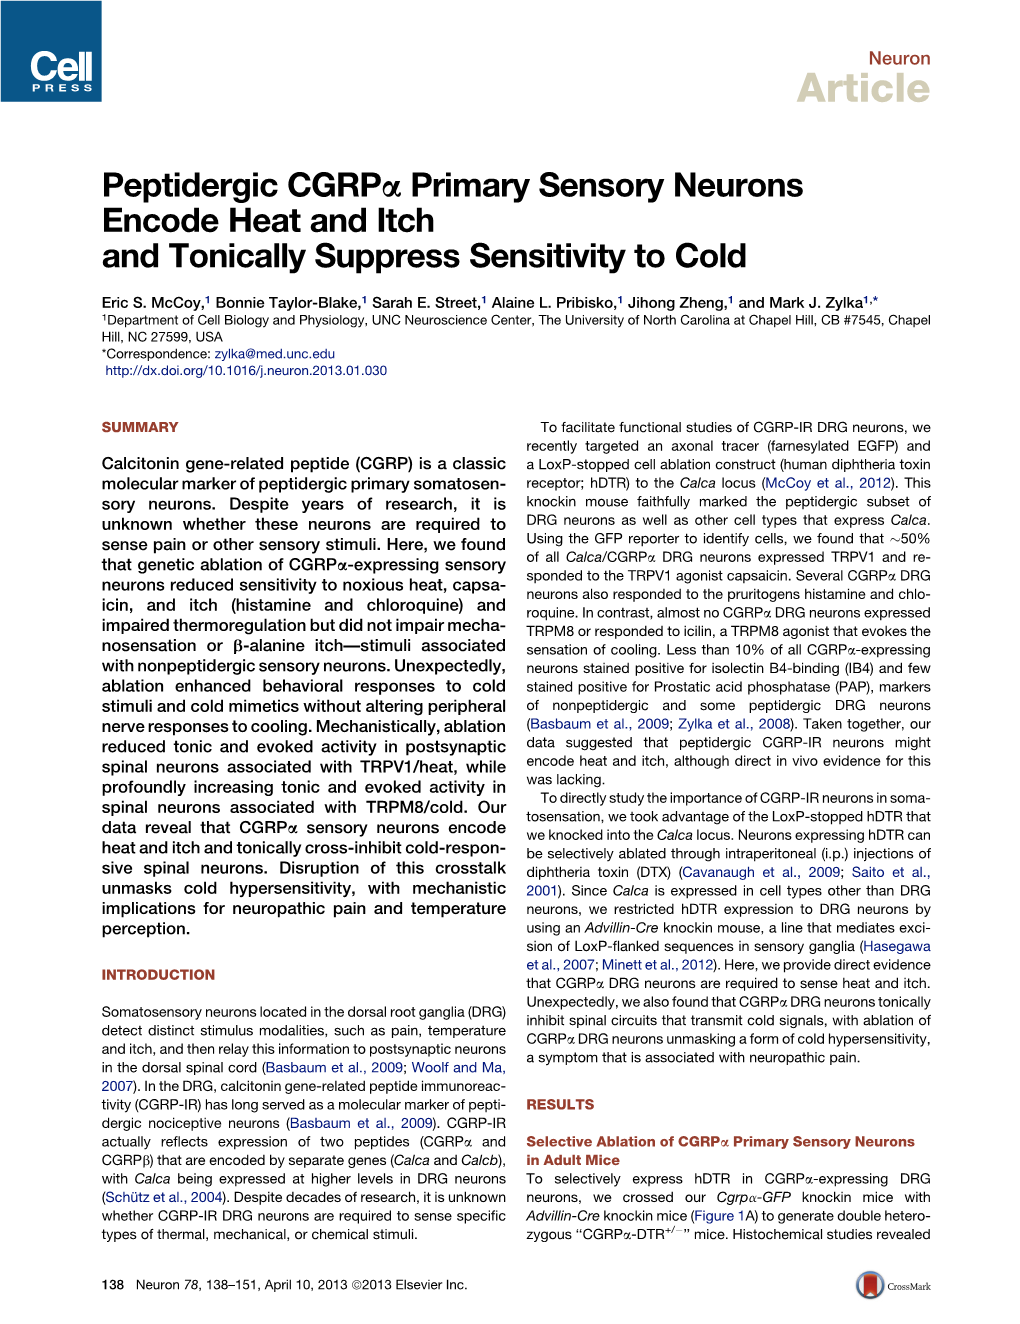 Peptidergic Cgrpa Primary Sensory Neurons Encode Heat and Itch and Tonically Suppress Sensitivity to Cold